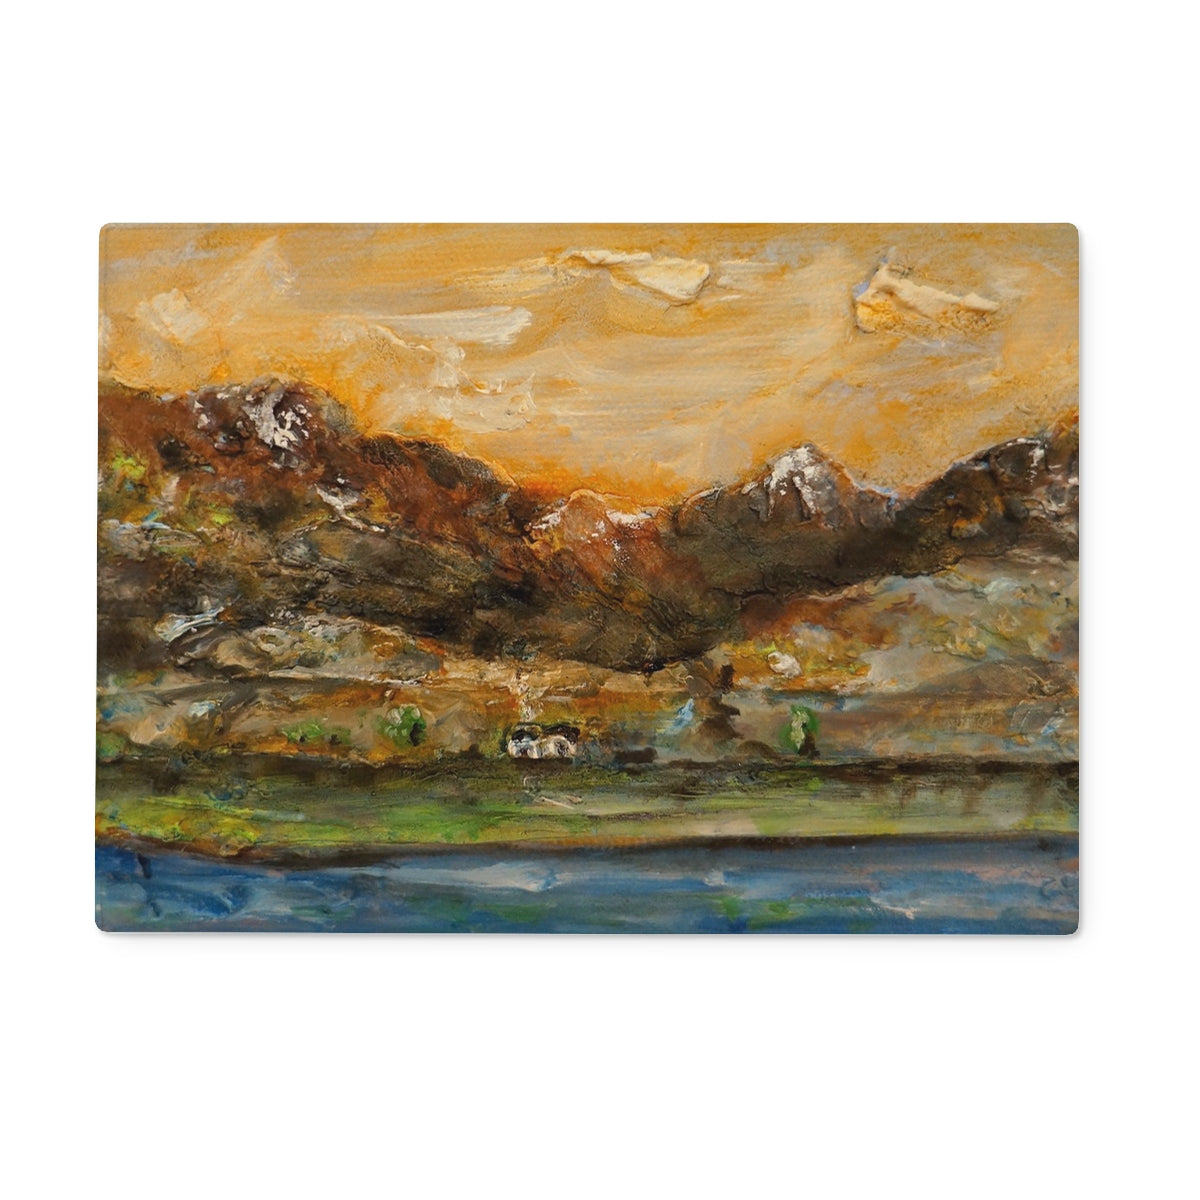 A Glencoe Cottage Art Gifts Glass Chopping Board-Glass Chopping Boards-Glencoe Art Gallery-15"x11" Rectangular-Paintings, Prints, Homeware, Art Gifts From Scotland By Scottish Artist Kevin Hunter